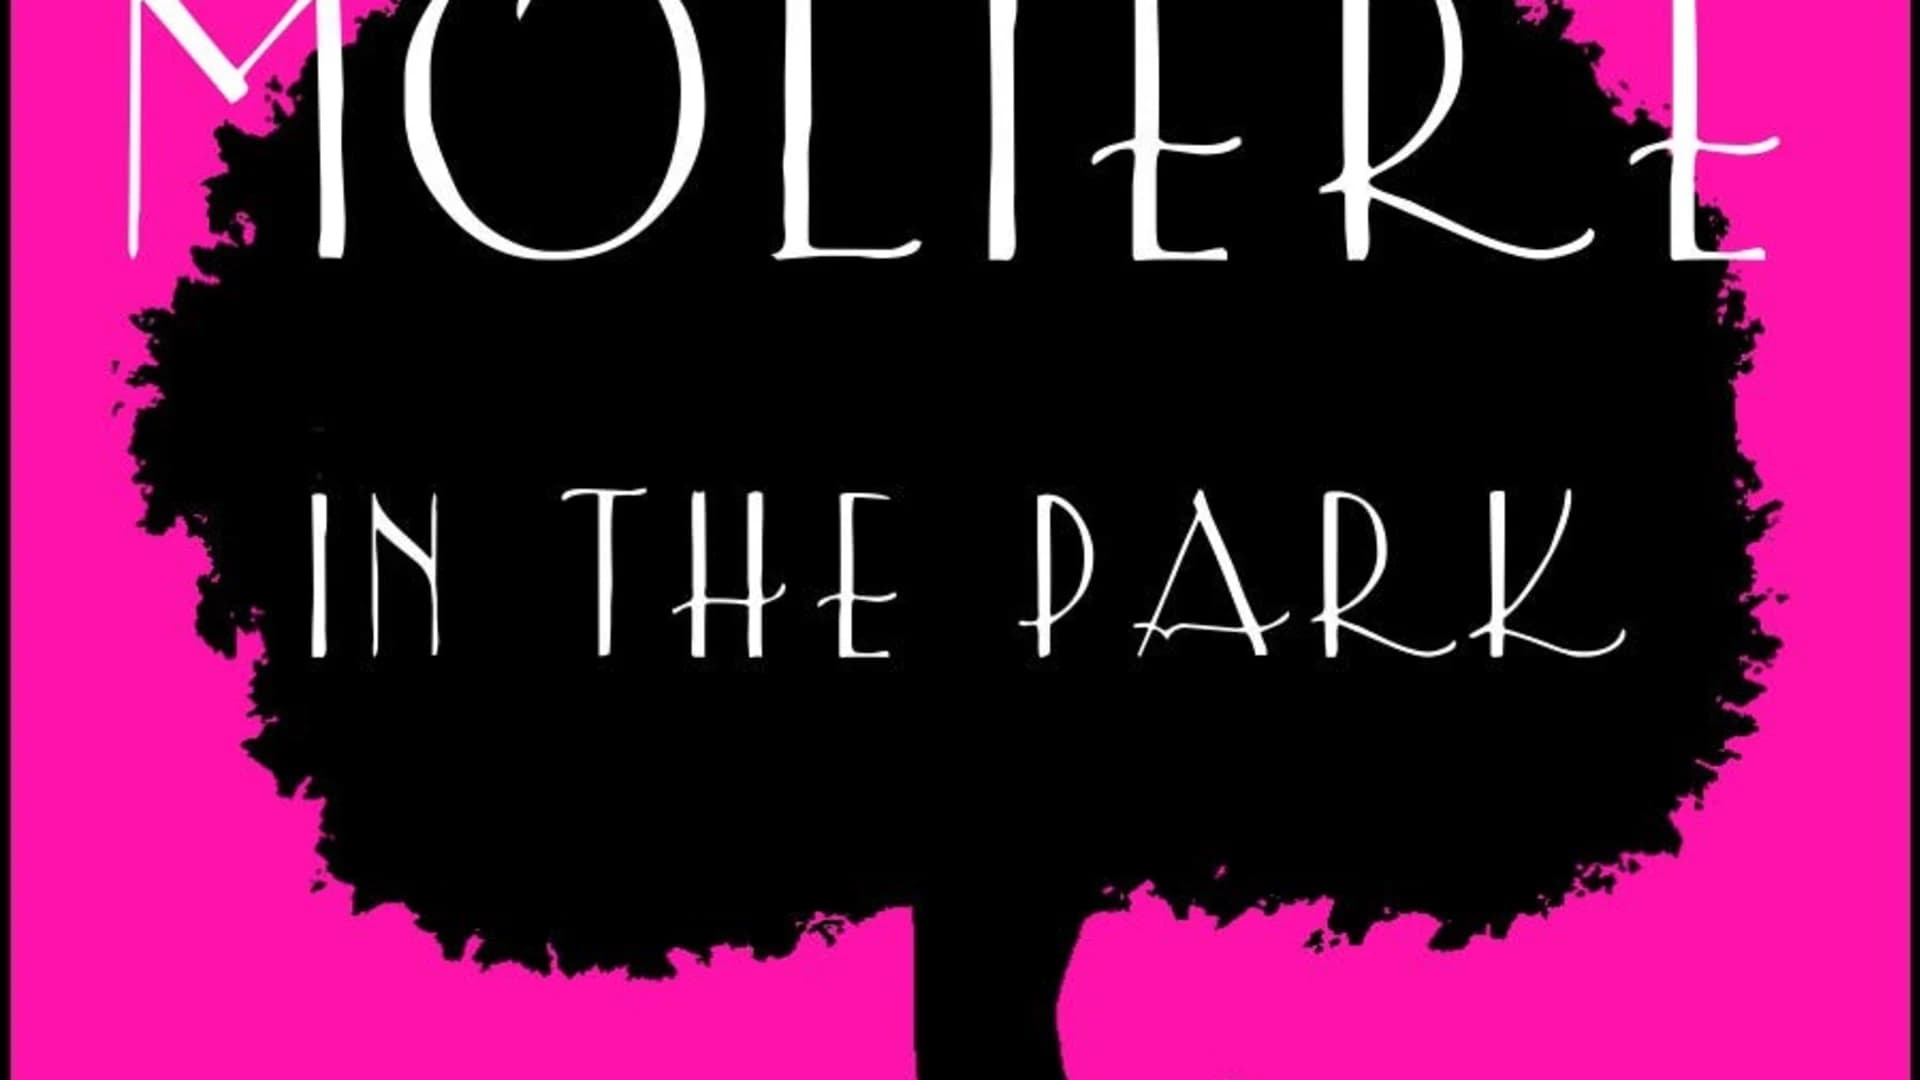 Moliere in the Park to kick off inaugural season